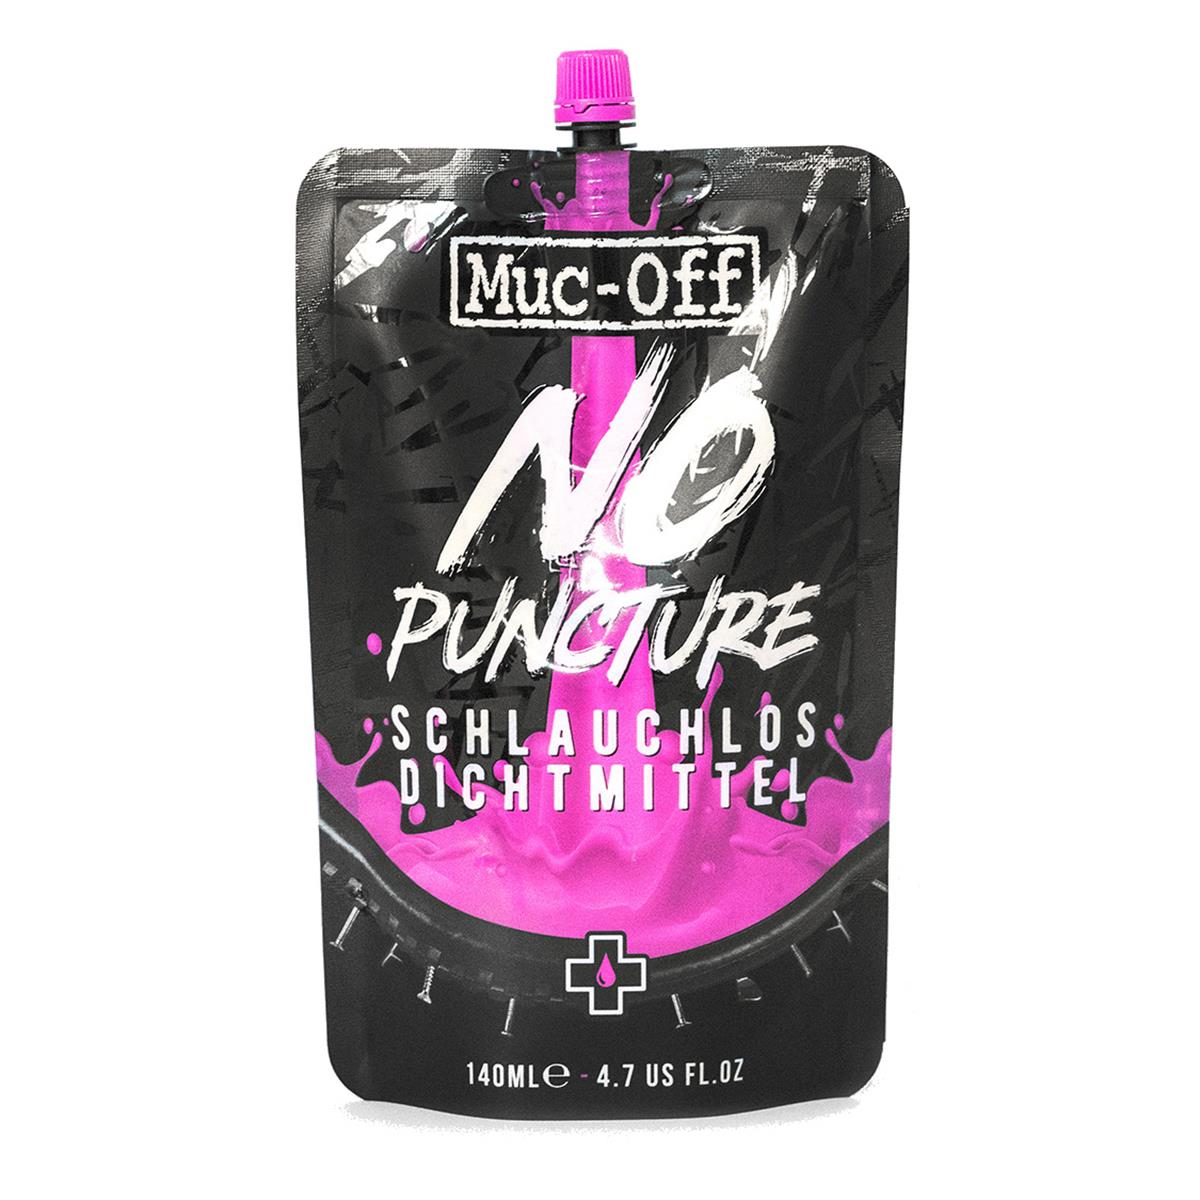 Muc-Off Tubeless Tire Sealant No Puncture Hassle 140 ml